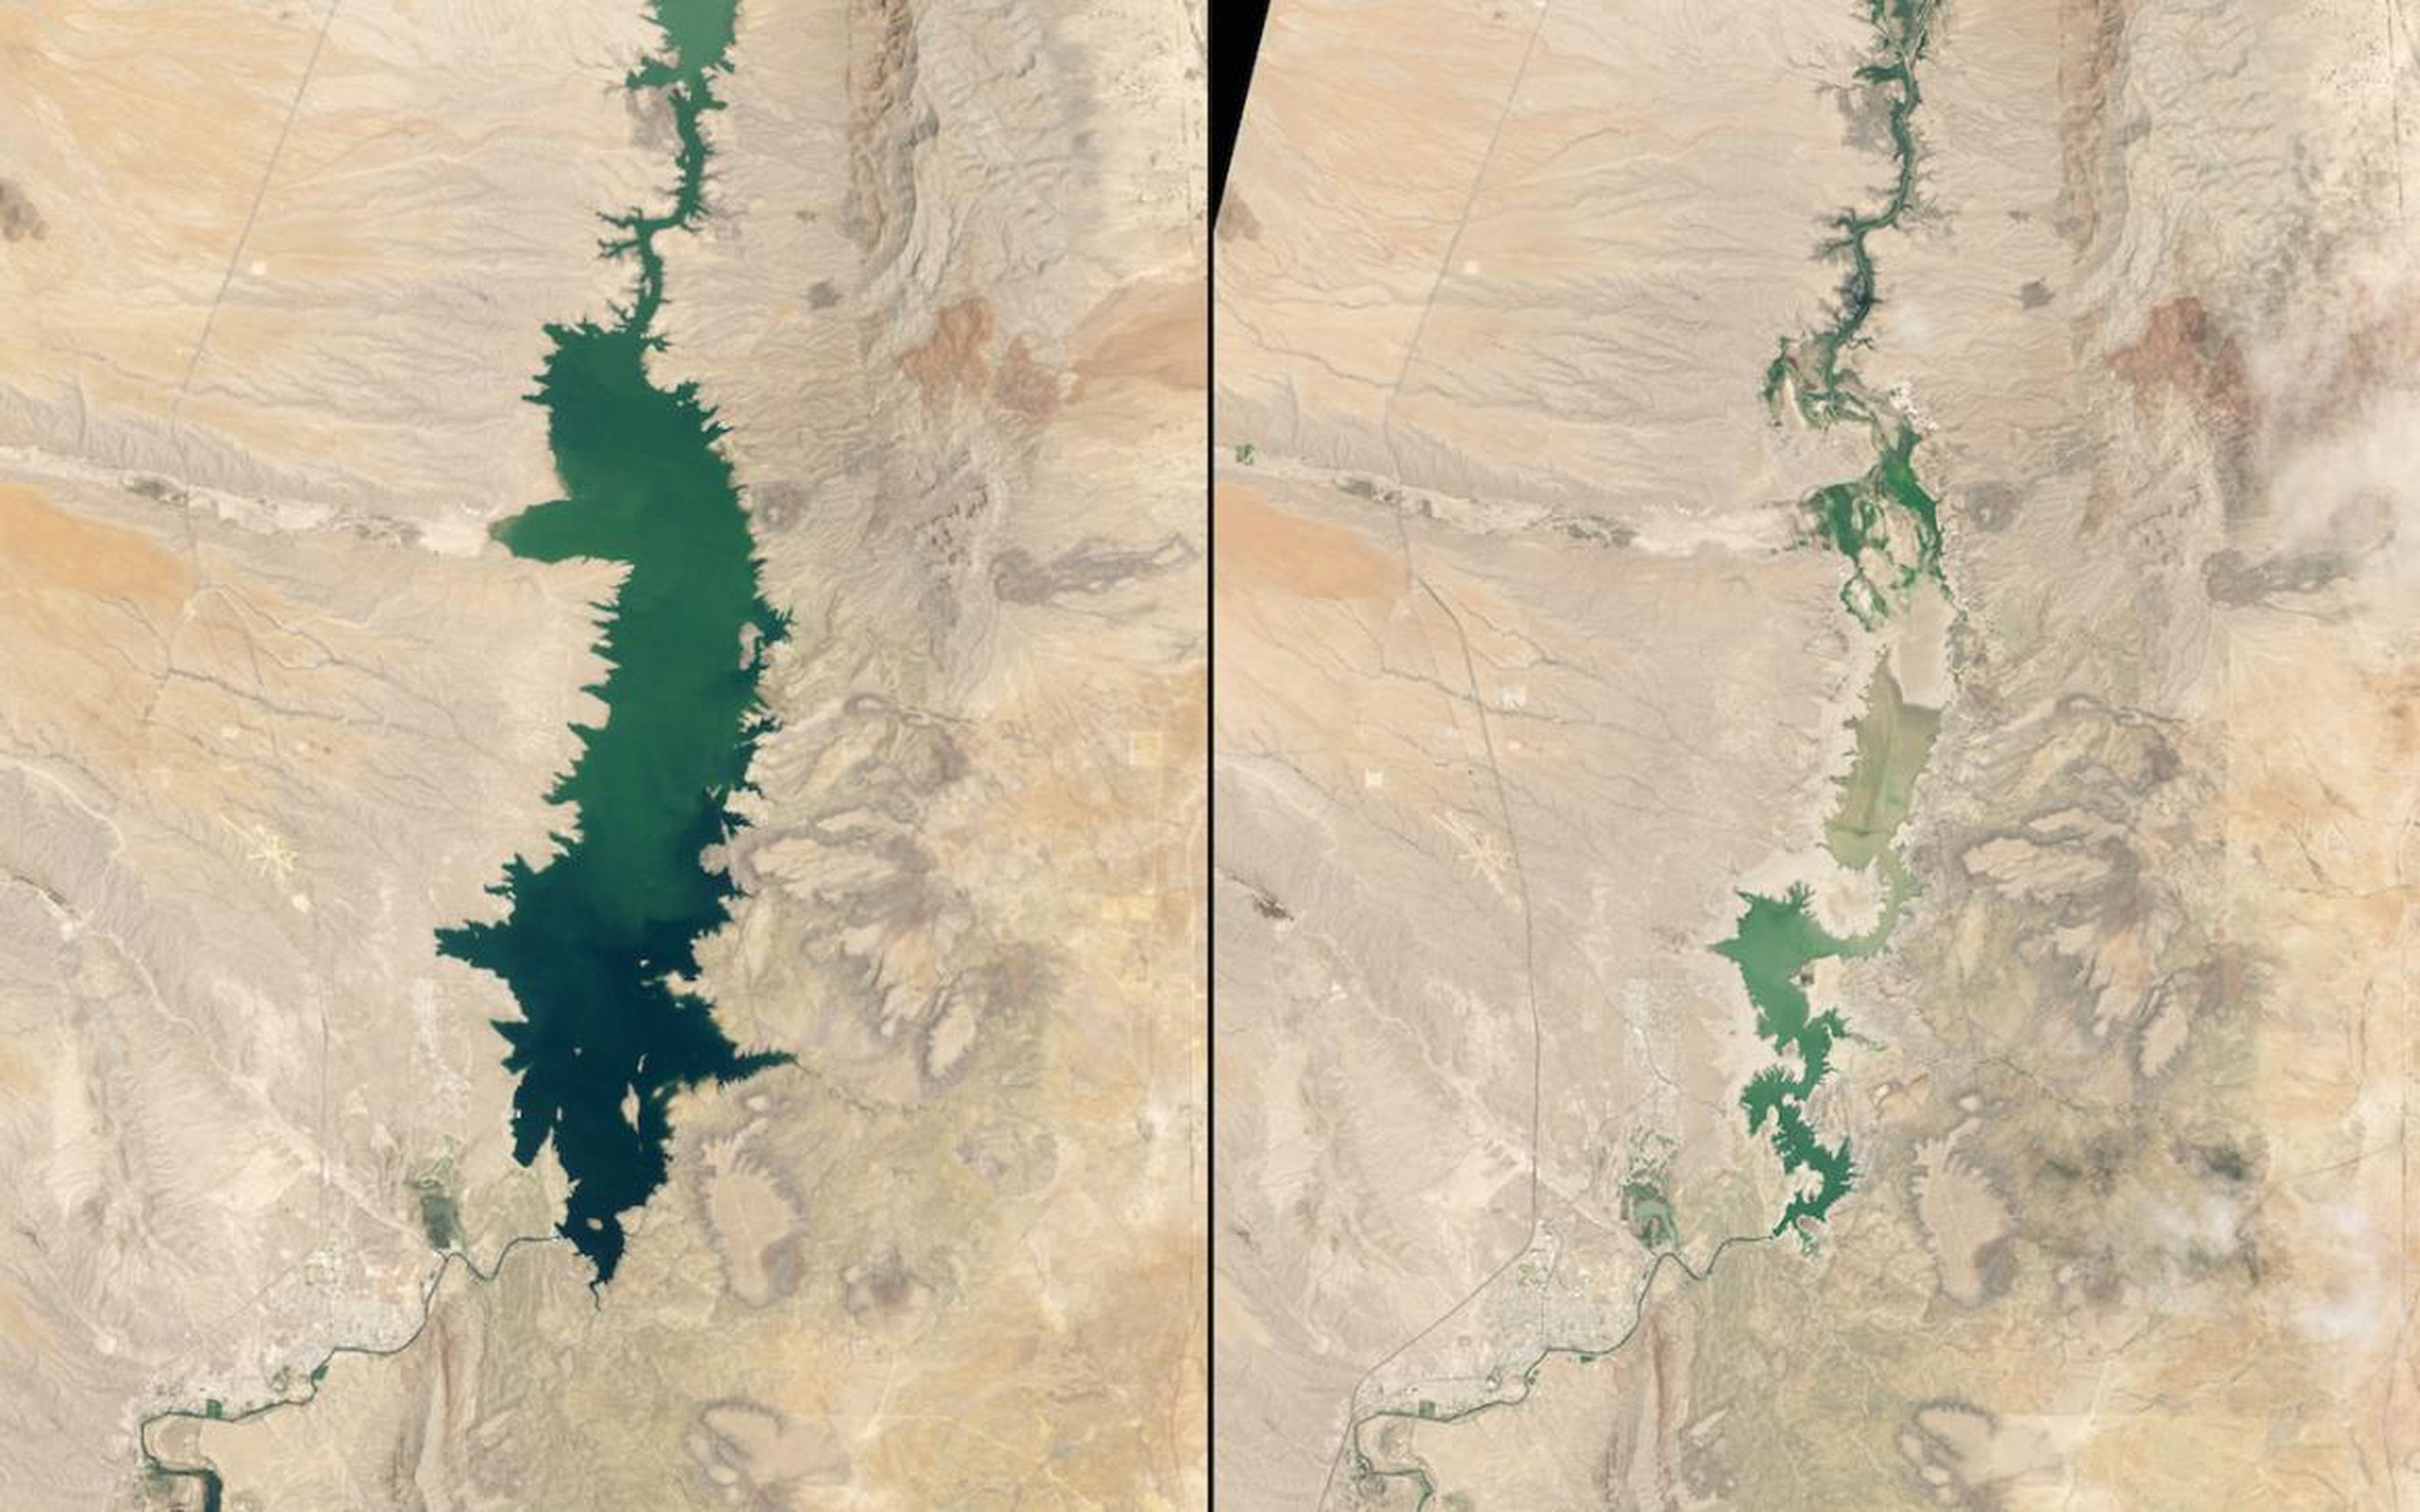 The same goes for the Elephant Butte Reservoir in the state of New Mexico. Here it is in 1994 (left) and again in 2013 (right).